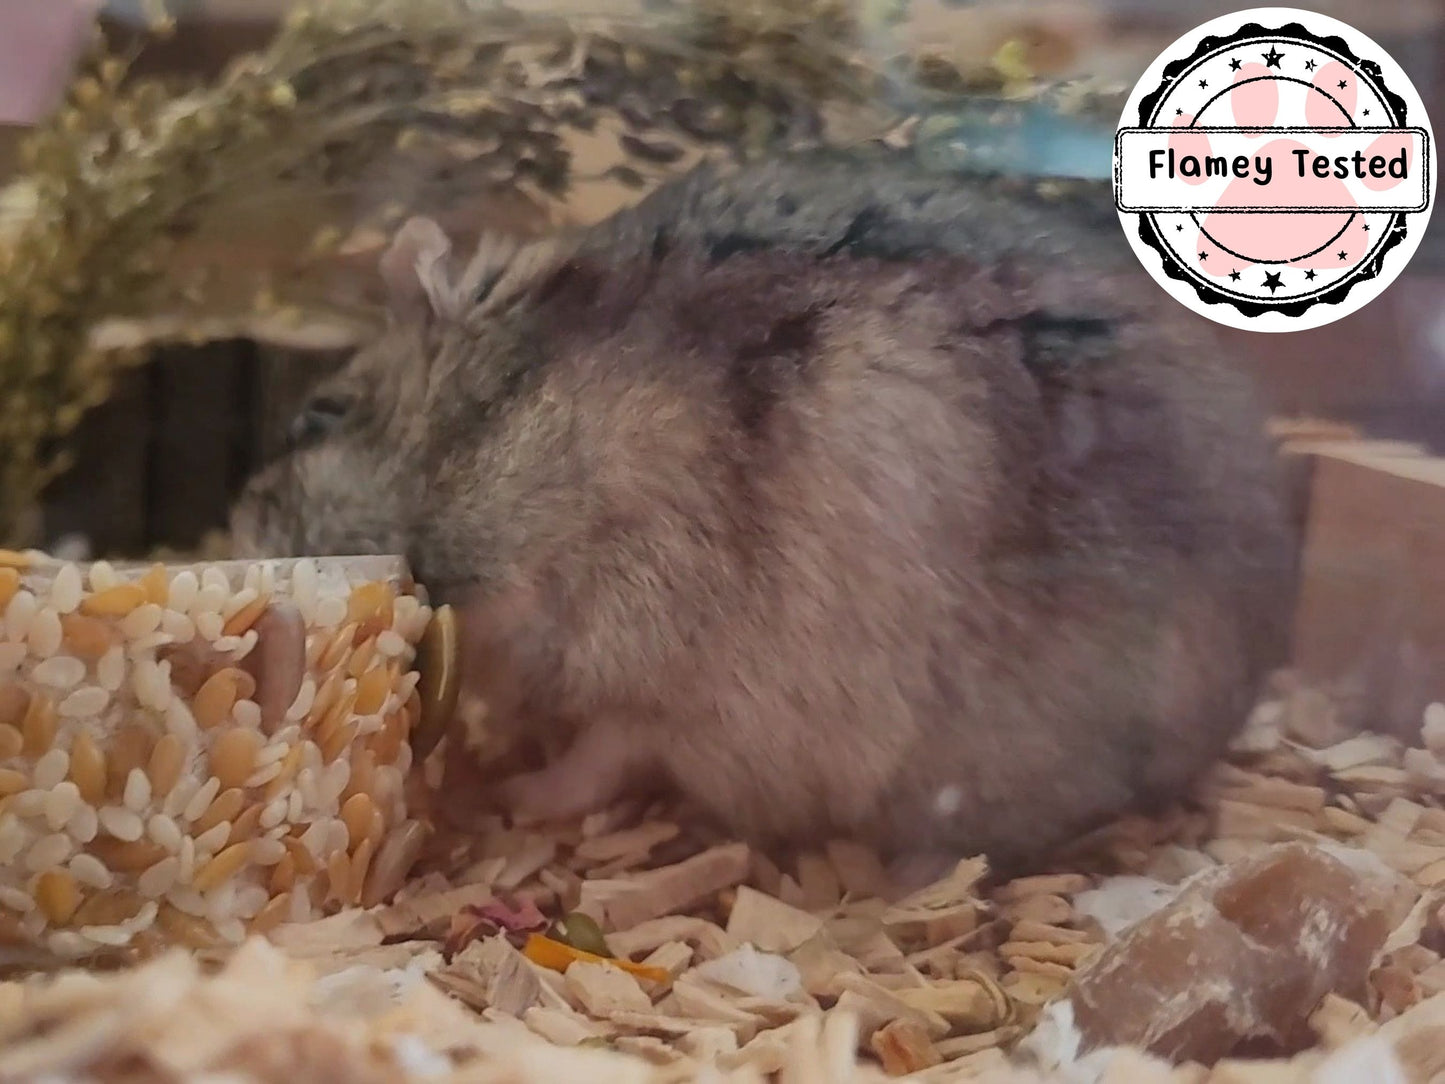 An adorable hamster sat in some beech chips playing with a boredom breaker